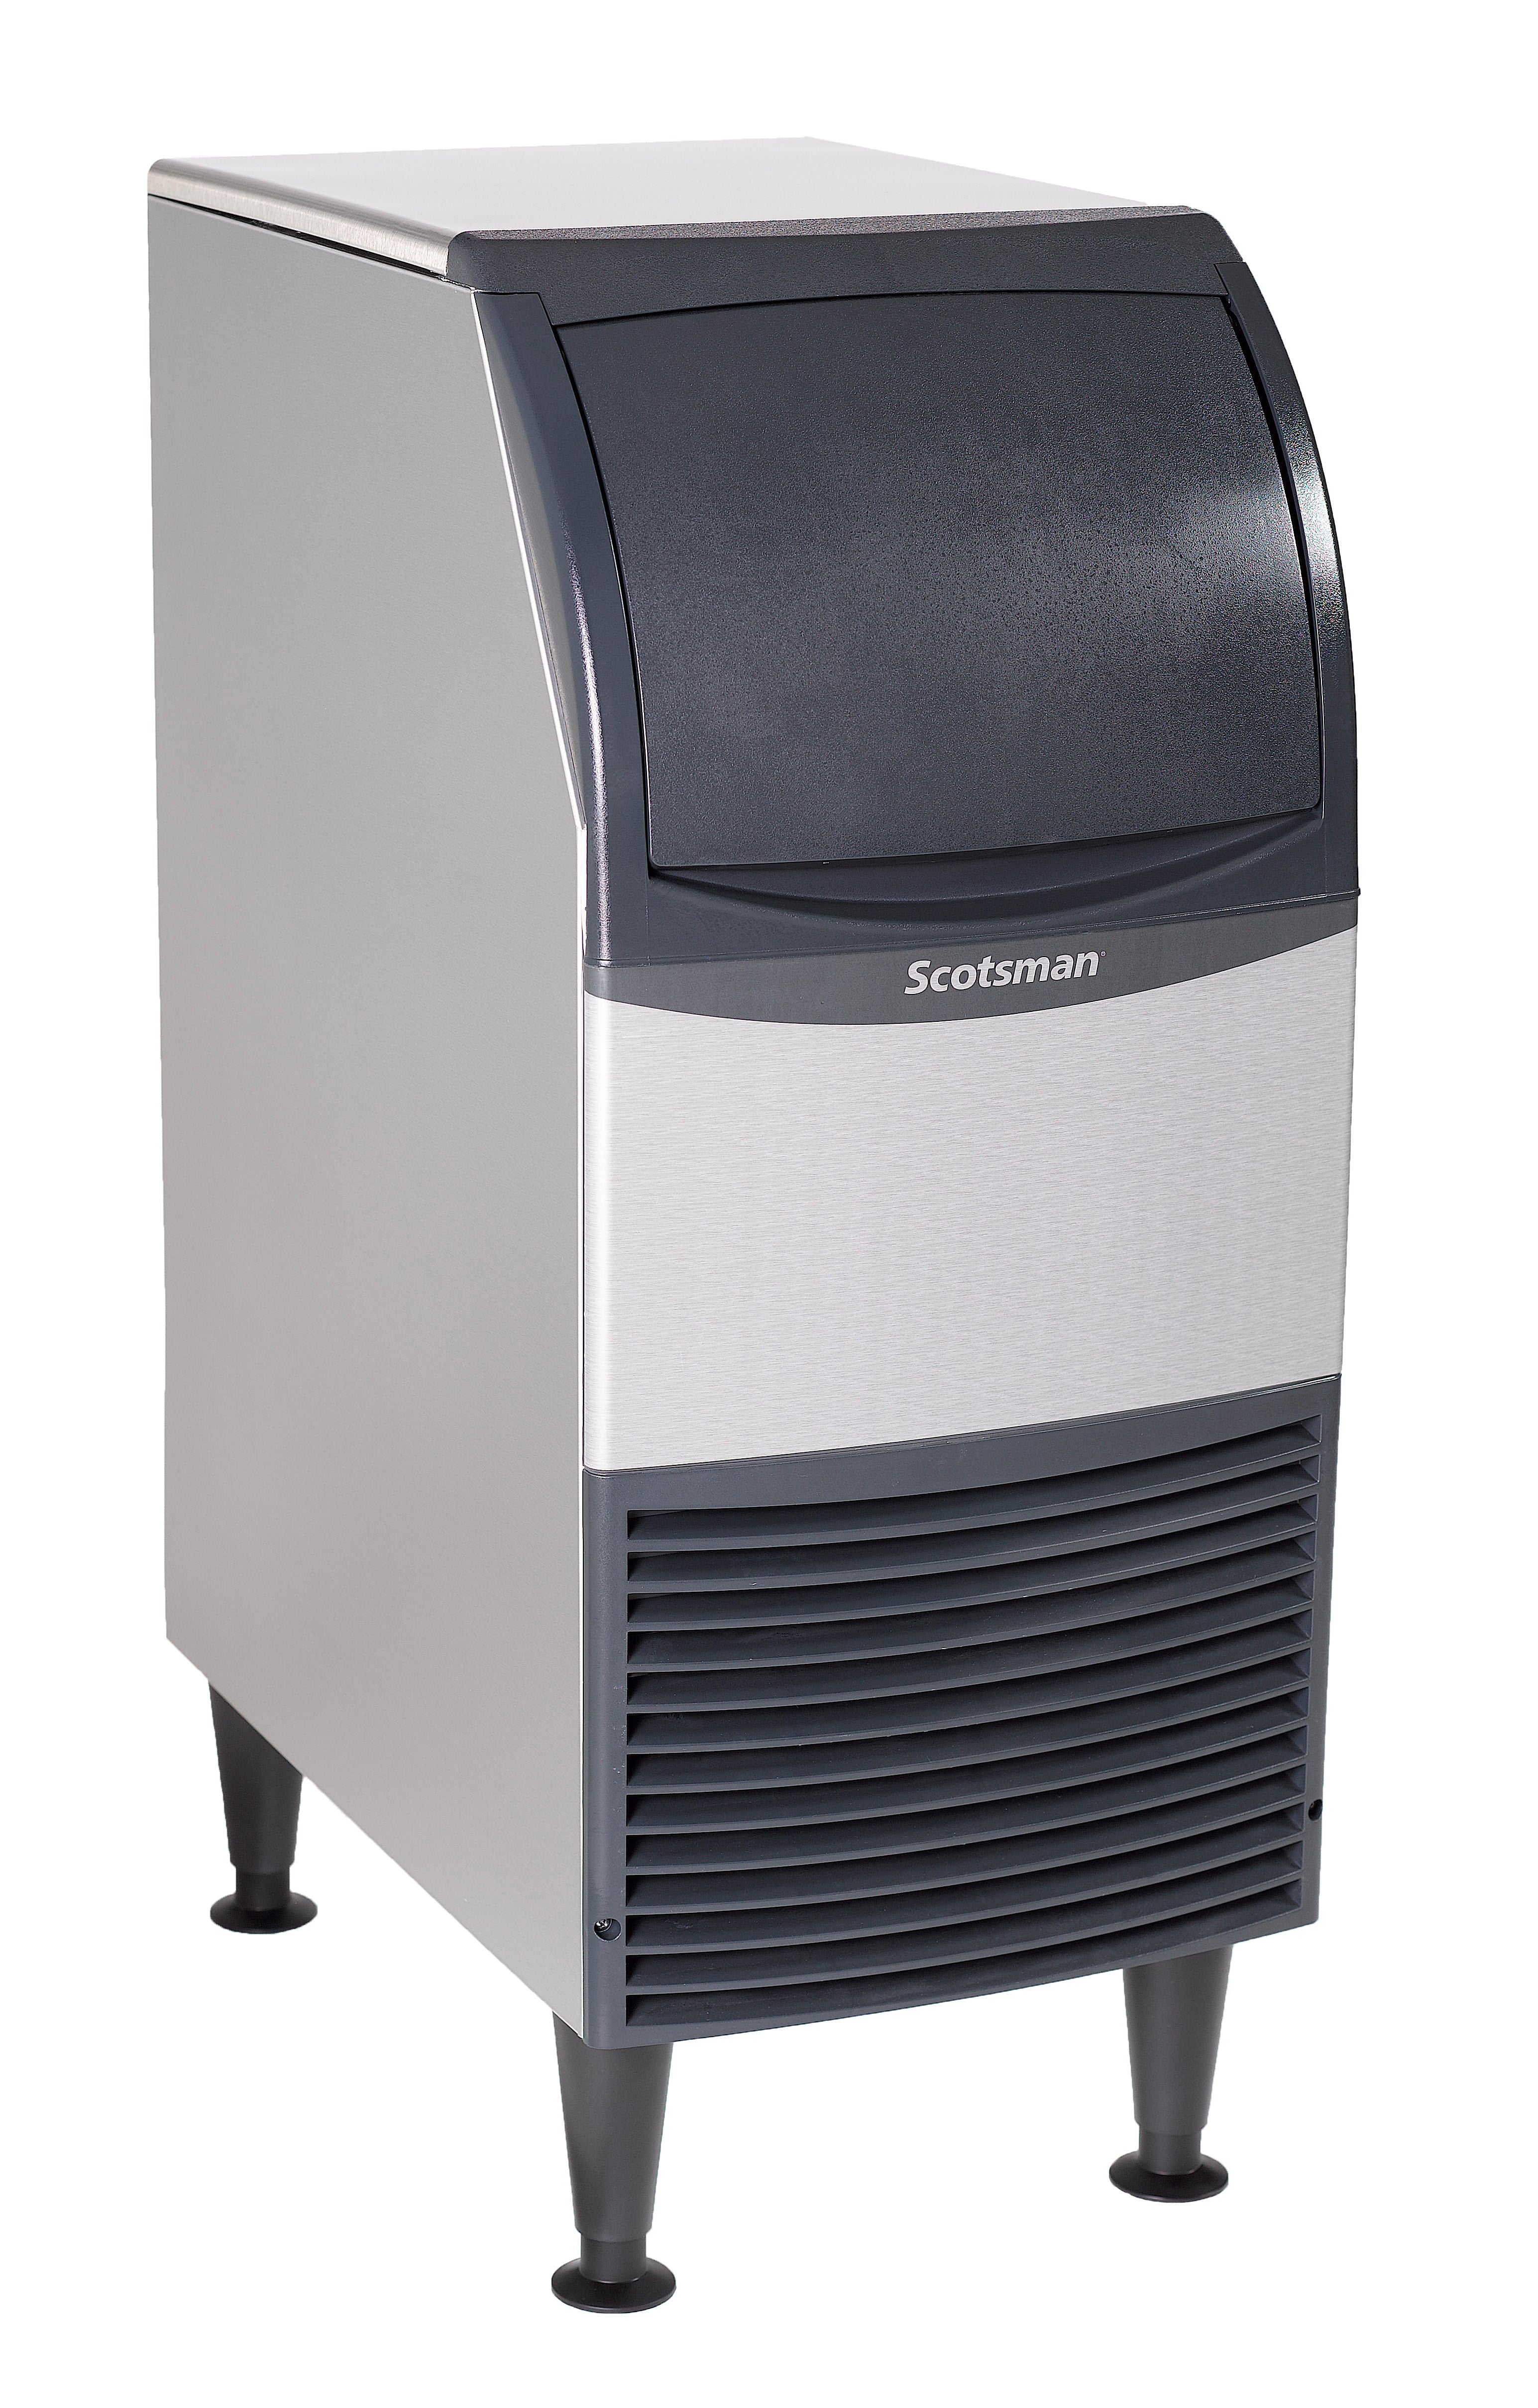 Scotsman UN0815A-1 Air Cooled Nugget Ice Maker with Bin Produces up to 79 Pounds of Ice Per Hour